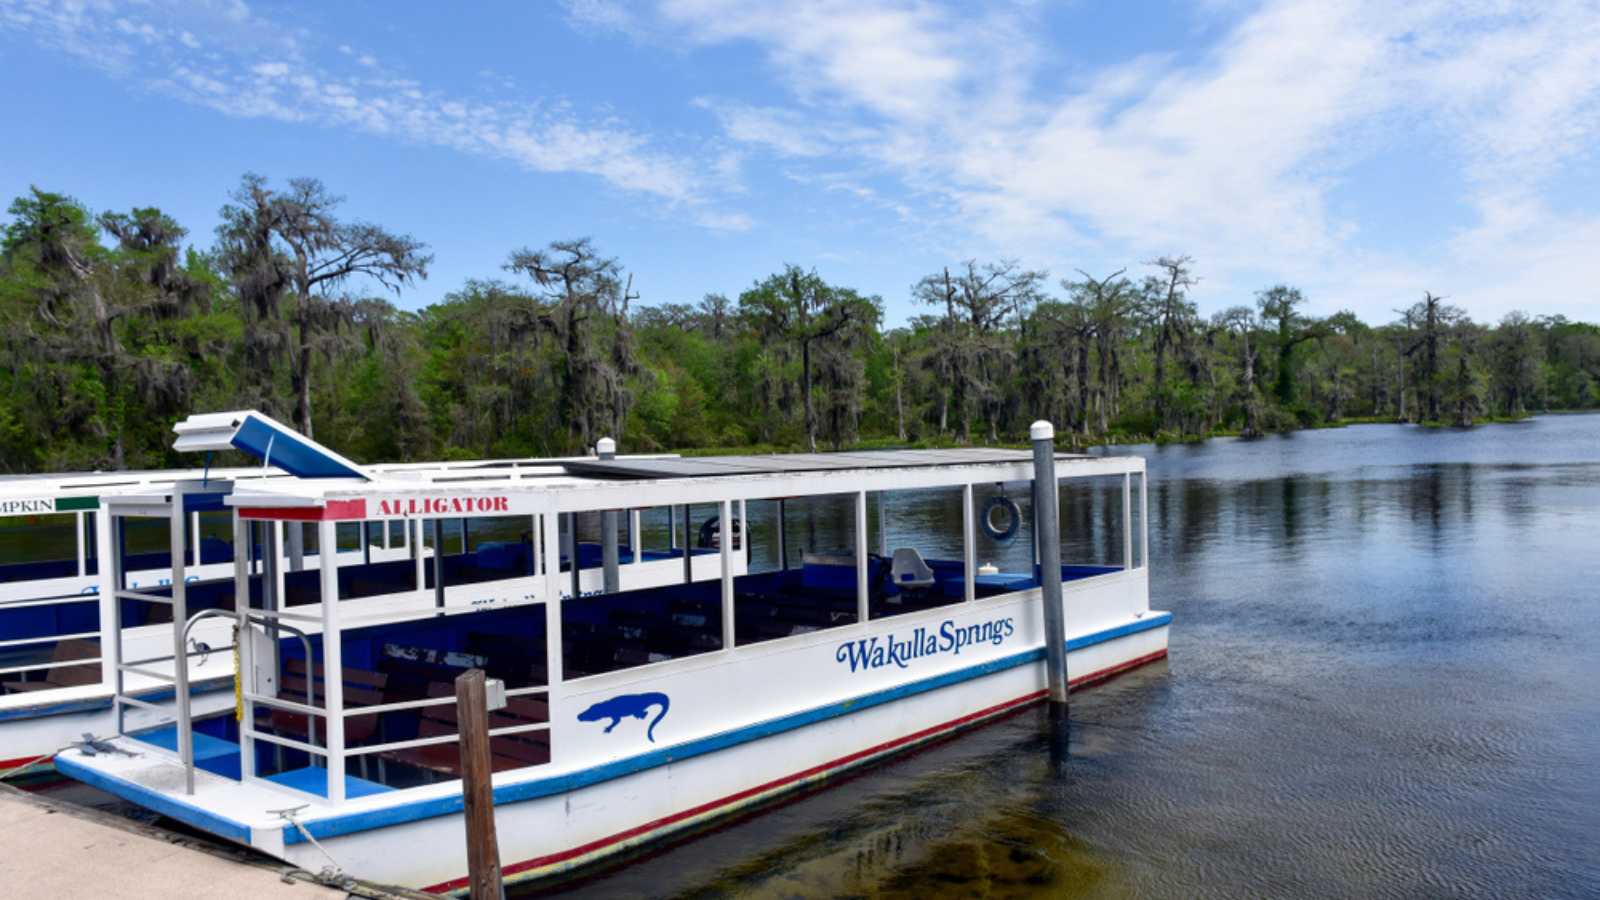 WAKULLA SPRINGS, FLORIDA, USA - APRIL 2, 2016 A world class cave diving destination, the Edward Ball Wakulla Springs State Park is located near Tallahassee. Boat tours are popular with visitors.